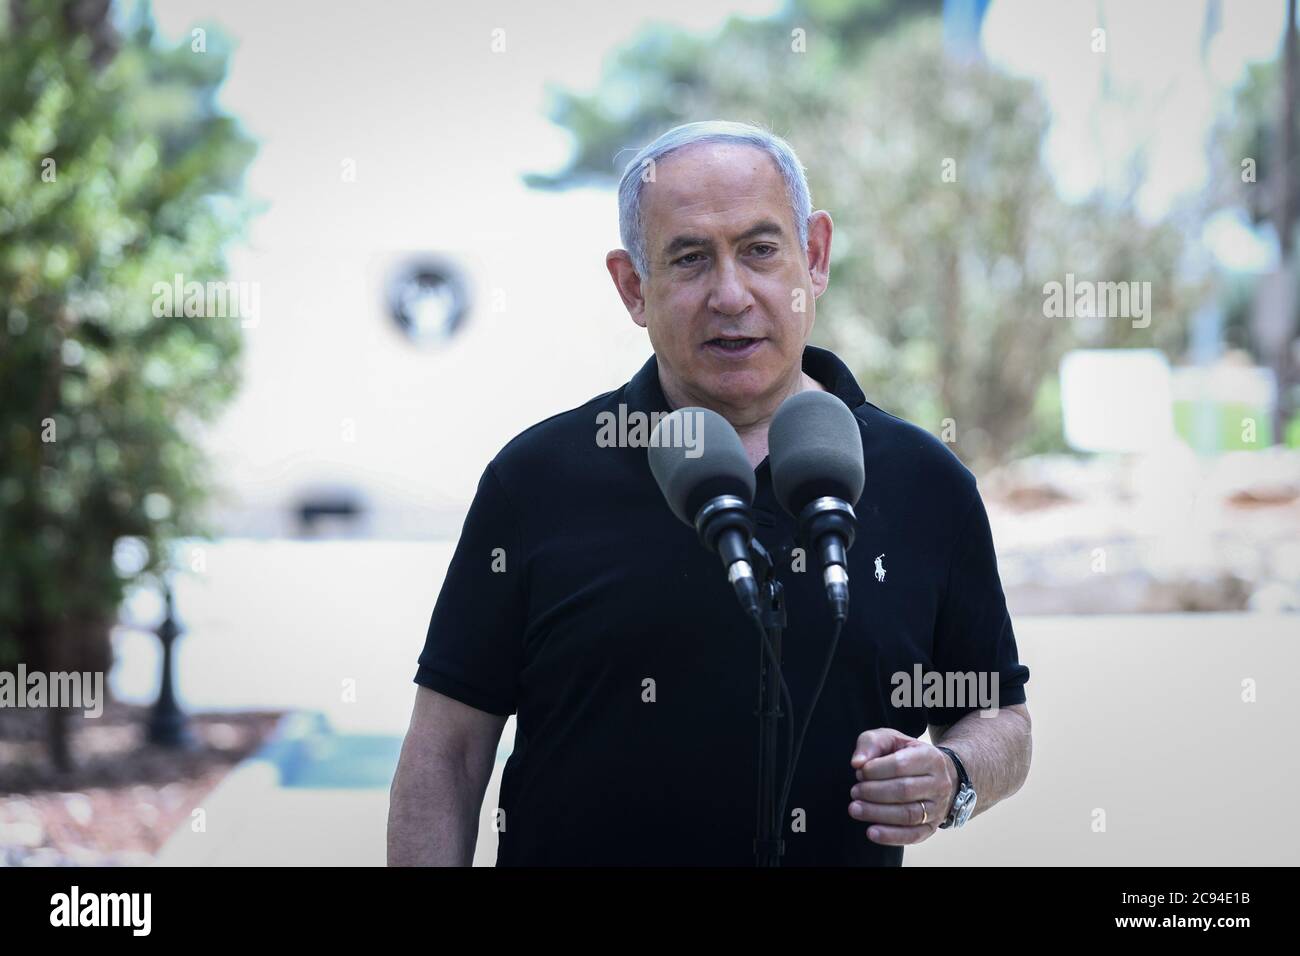 (200728) -- SAFED (ISRAEL), July 28, 2020 (Xinhua) -- Israeli Prime Minister Benjamin Netanyahu speaks at the Northern Command Headquarters of Israel Defense Forces in Safed, northern Israel, on July 28, 2020. Netanyahu visited the Israel-Lebanon border on Tuesday, a day after a military escalation in the region. (David Cohen/JINI via Xinhua) Stock Photo